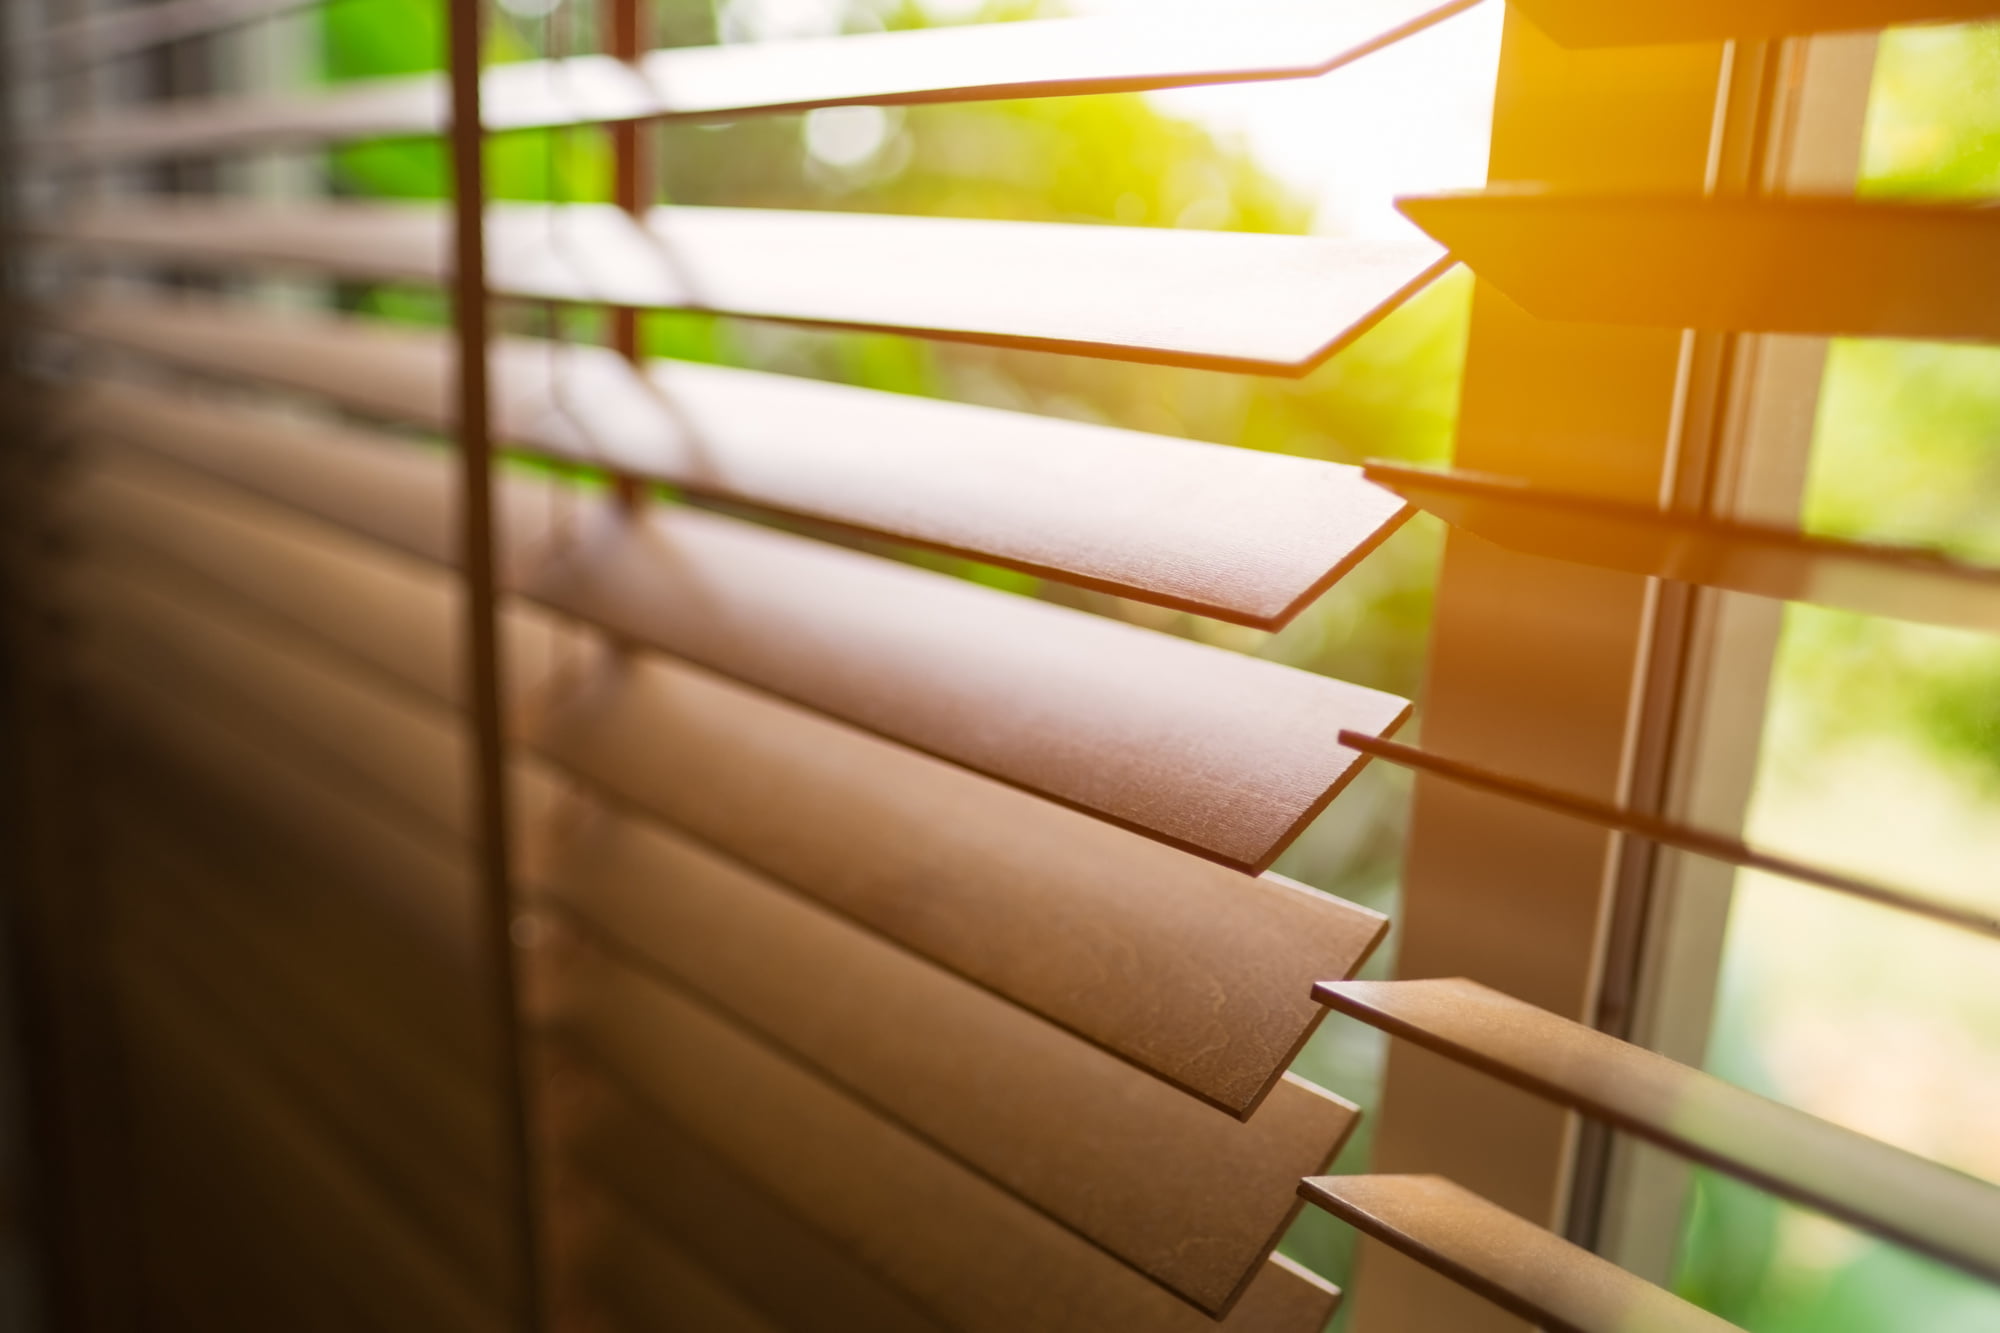 Are you looking for blinds that will last a long time? Click here for three practical tips for choosing quality blinds for your home.